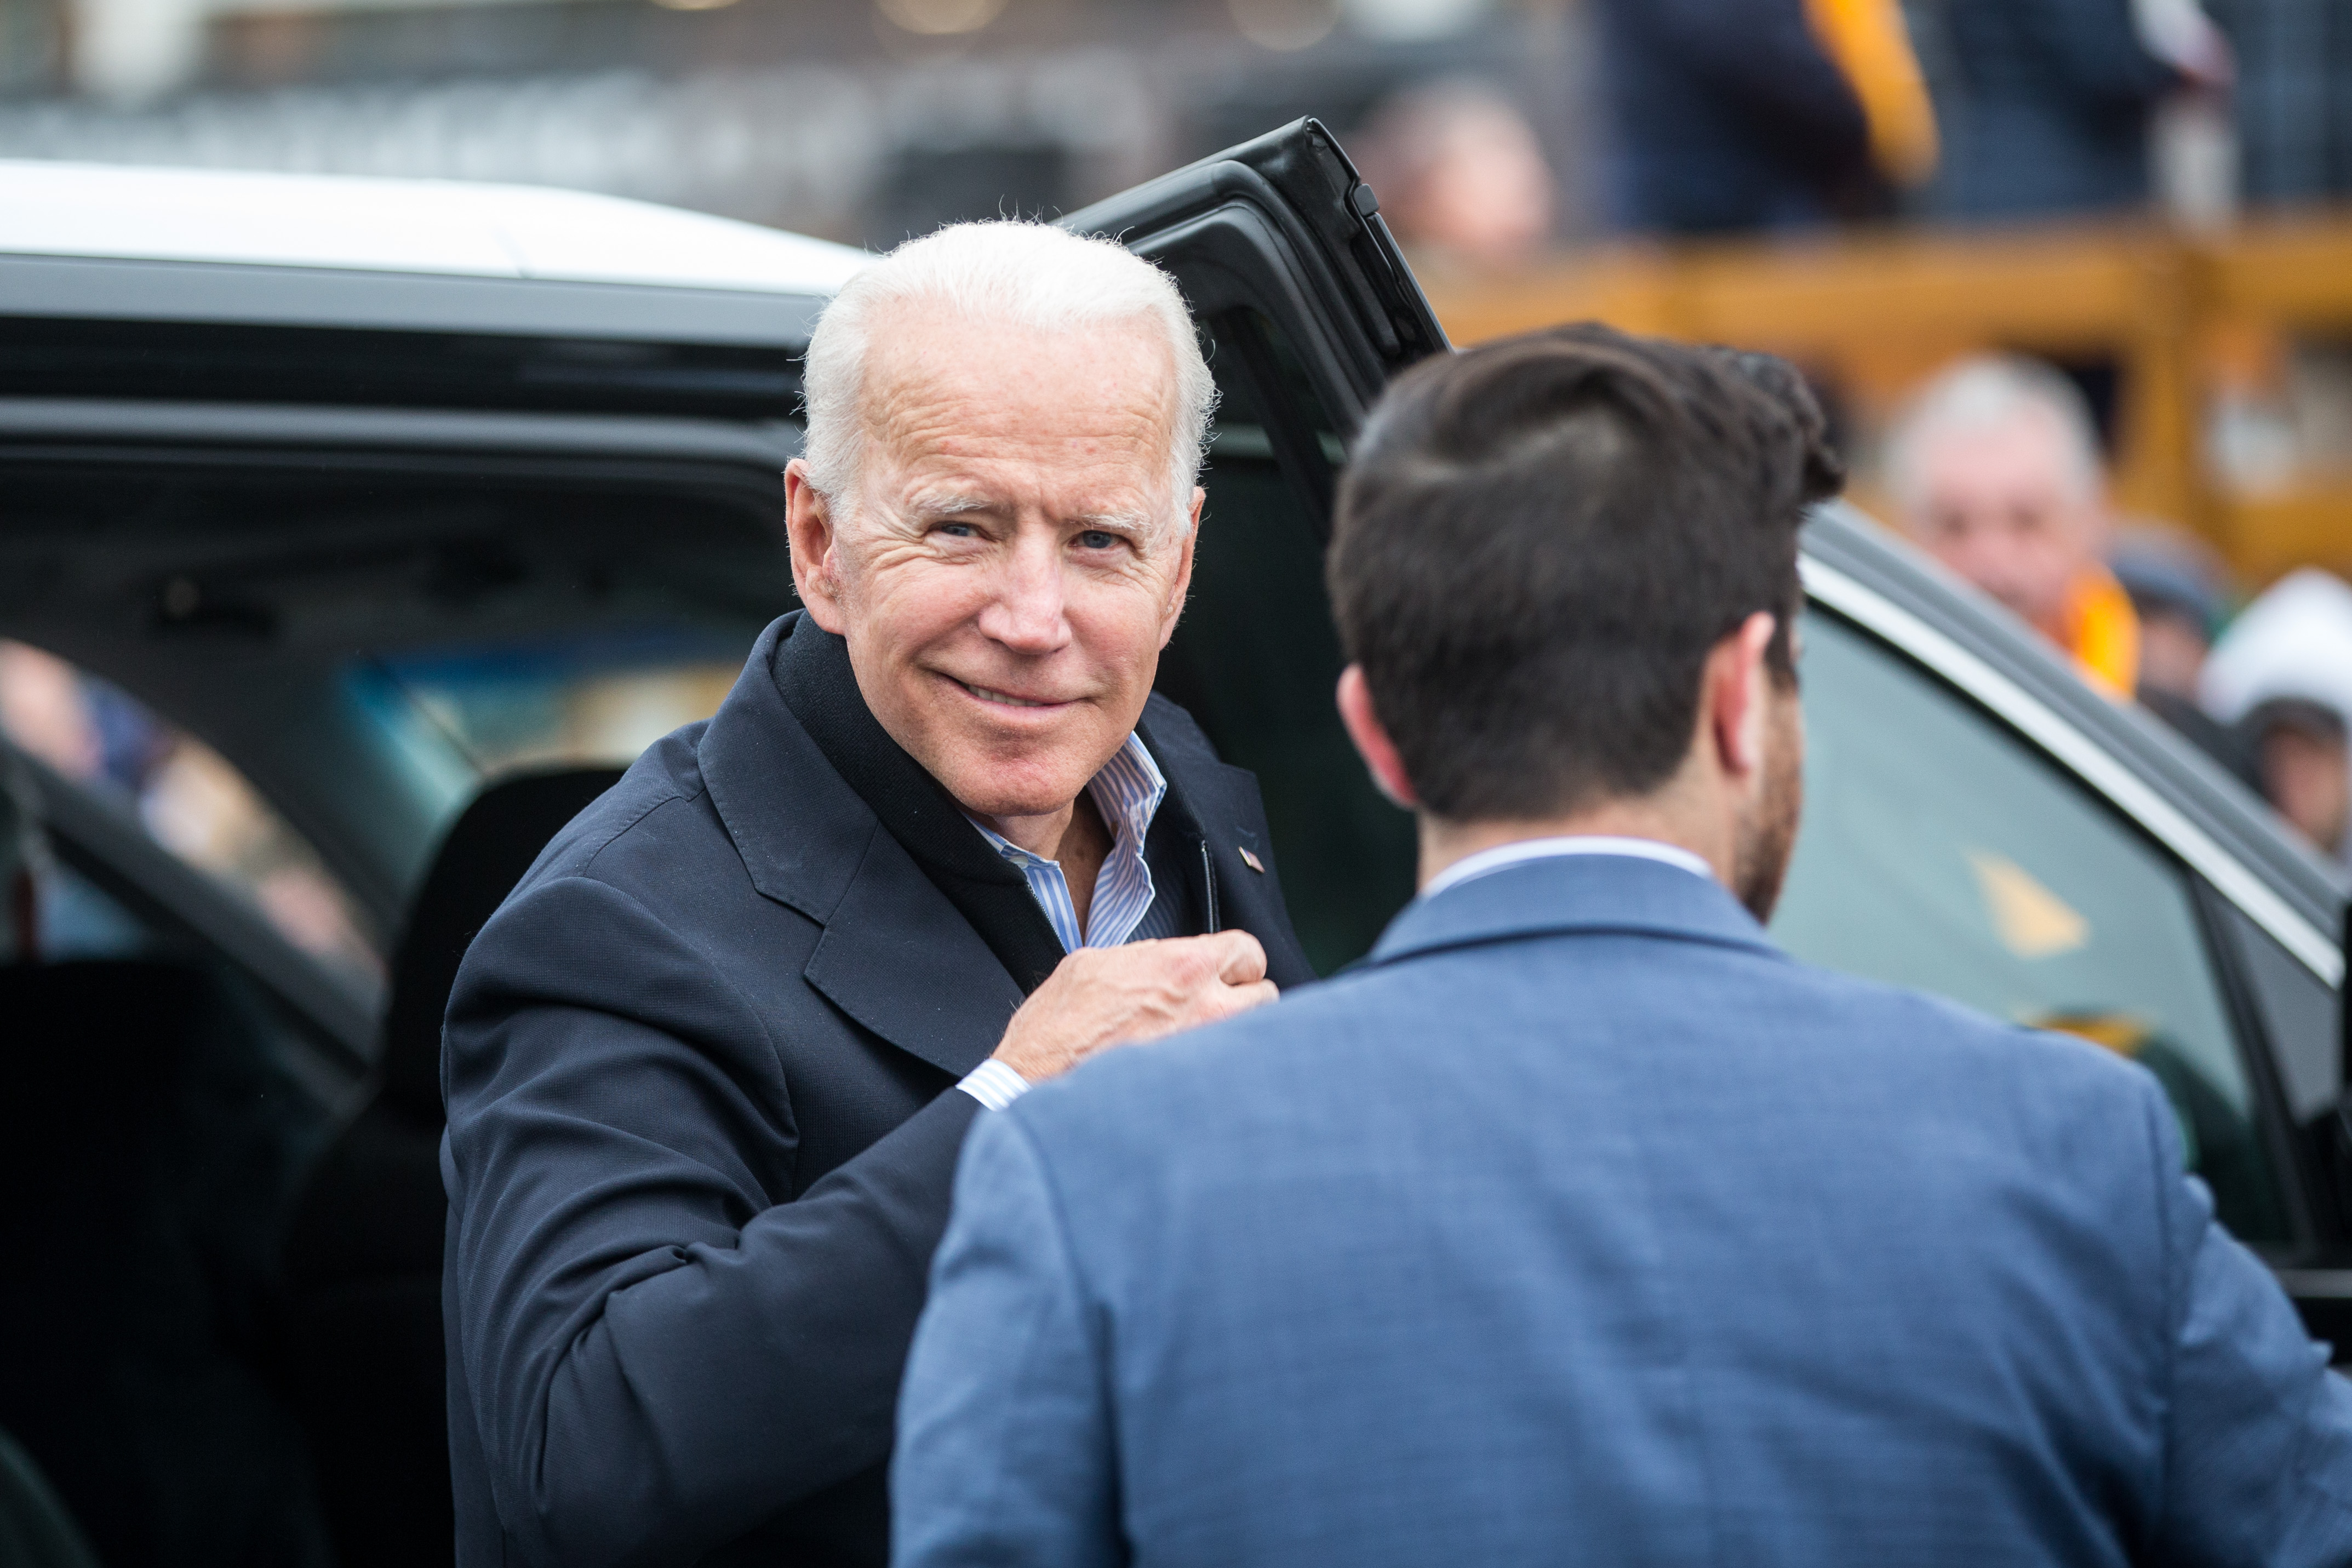 DORCHESTER, MA - APRIL 18: Former Vice President Joe Biden arrives in front of a Stop & Shop in support of striking union workers on April 18, 2019 in Dorchester, Massachusetts. Thousands of unionized Stop & Shop workers across New England walked off the job last week in an ongoing strike in response to a proposed contract which the United Food & Commercial Workers union says would cut health care benefits and pensions for employees. (Photo by Scott Eisen/Getty Images)